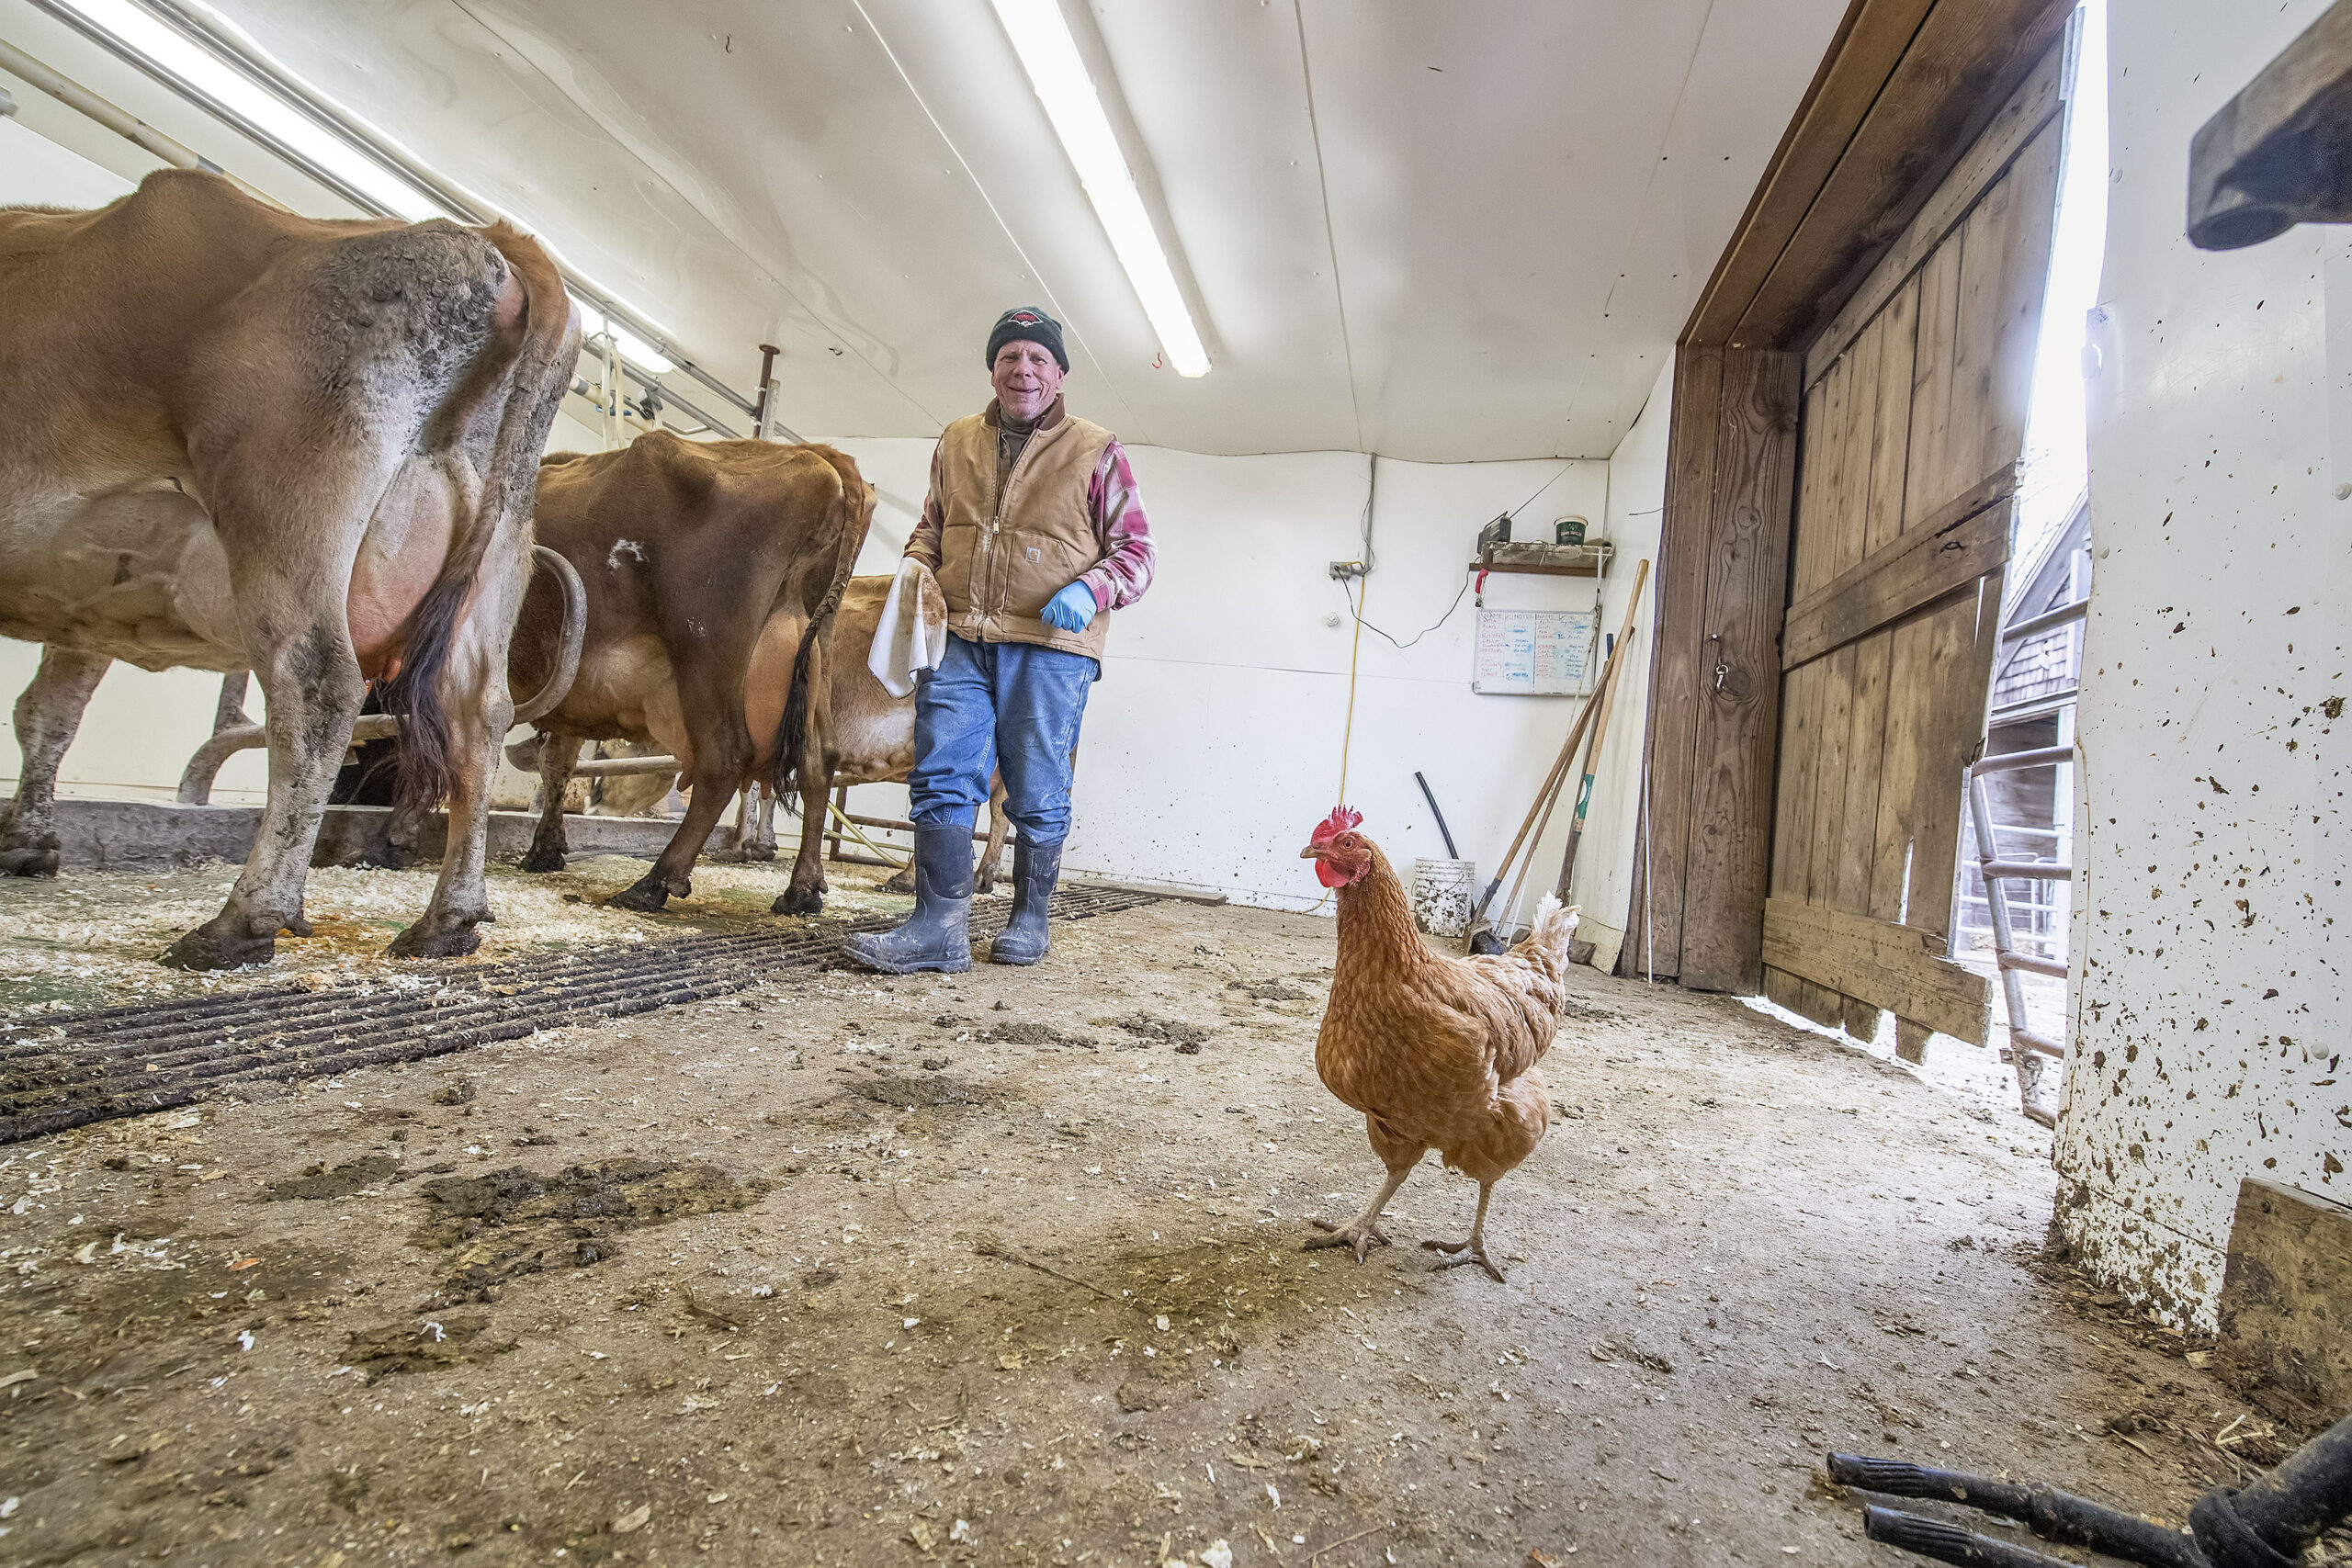 A rooster joins the party inside the milking pen during the afternoon milking of the cows at the Mecox Bay Dairy on March 1st, 2022